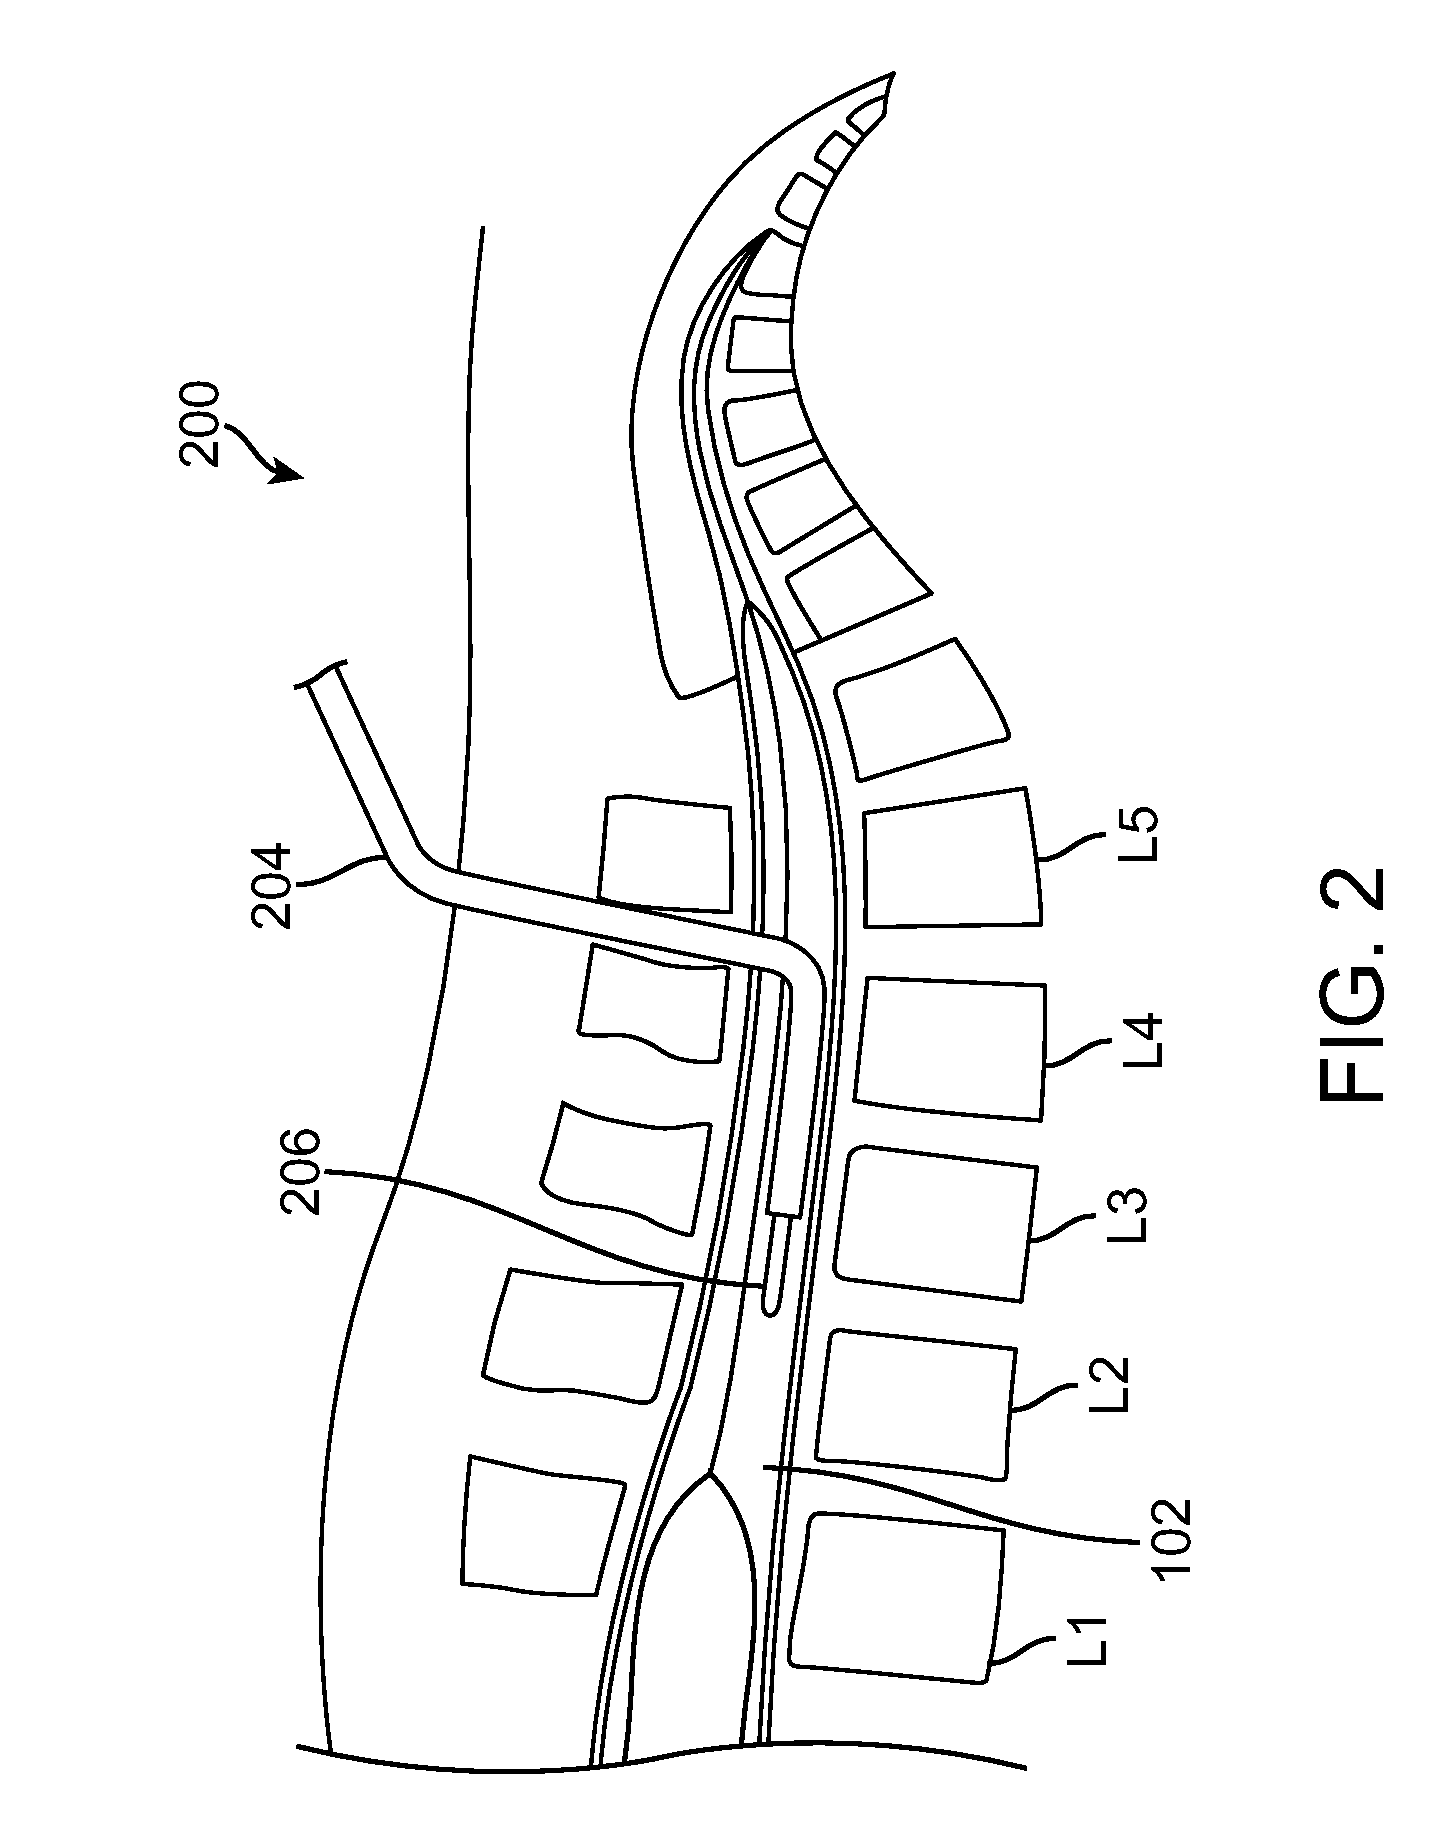 Methods for Simultaneous Injection and Aspiration of Fluids During a Medical Procedure